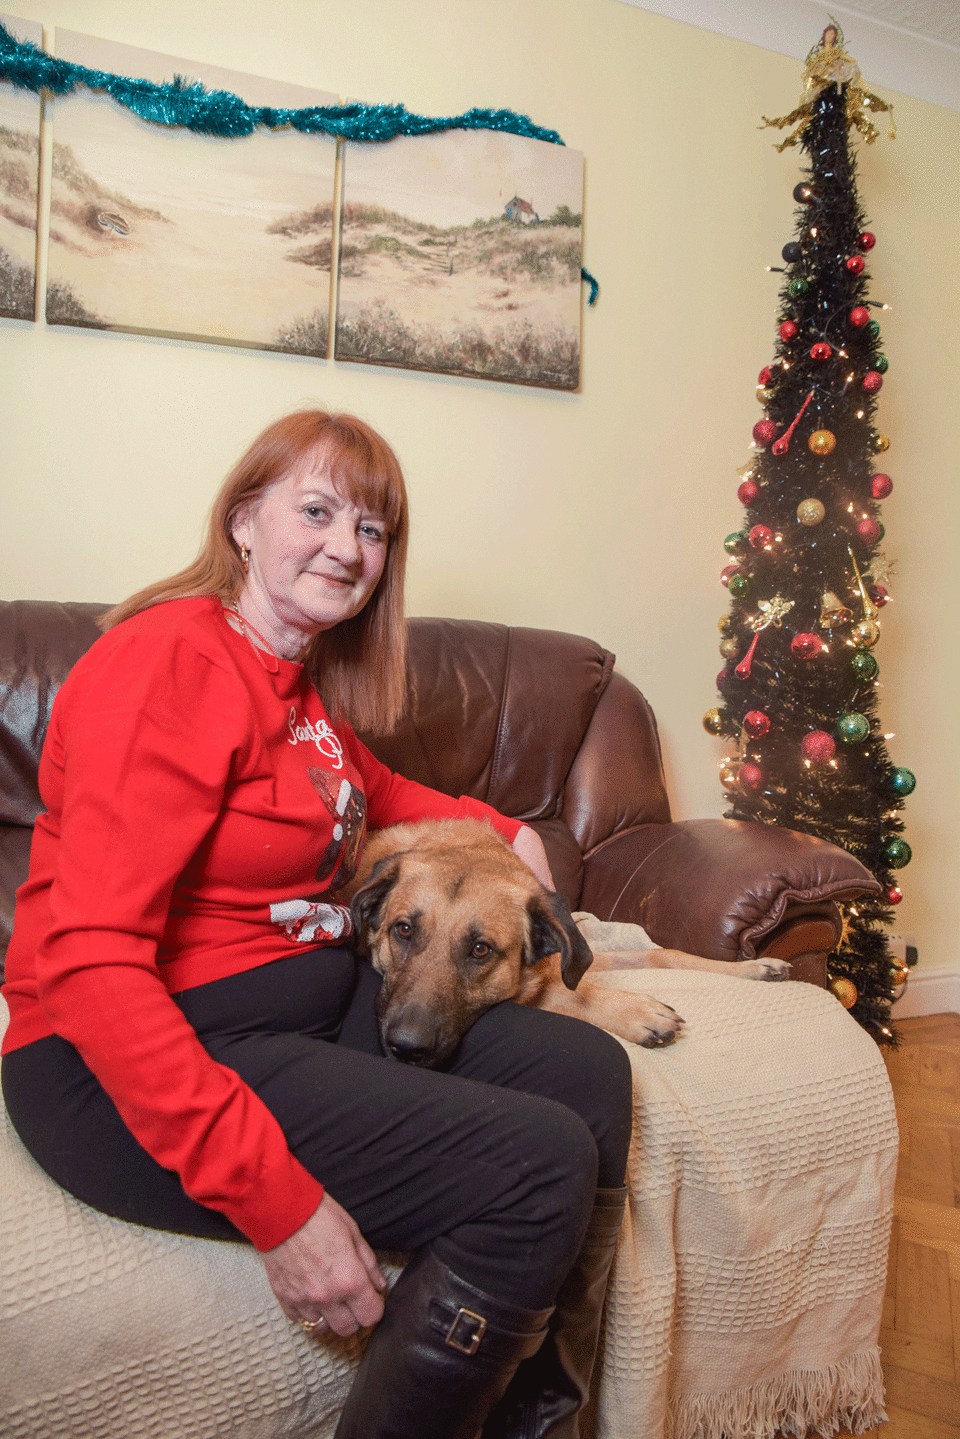 Pauline Warren, 62, noticed 15-month-old Belgian Shepherd Mickey had helped himself to one of the festive treats from the table. Photo: Caters